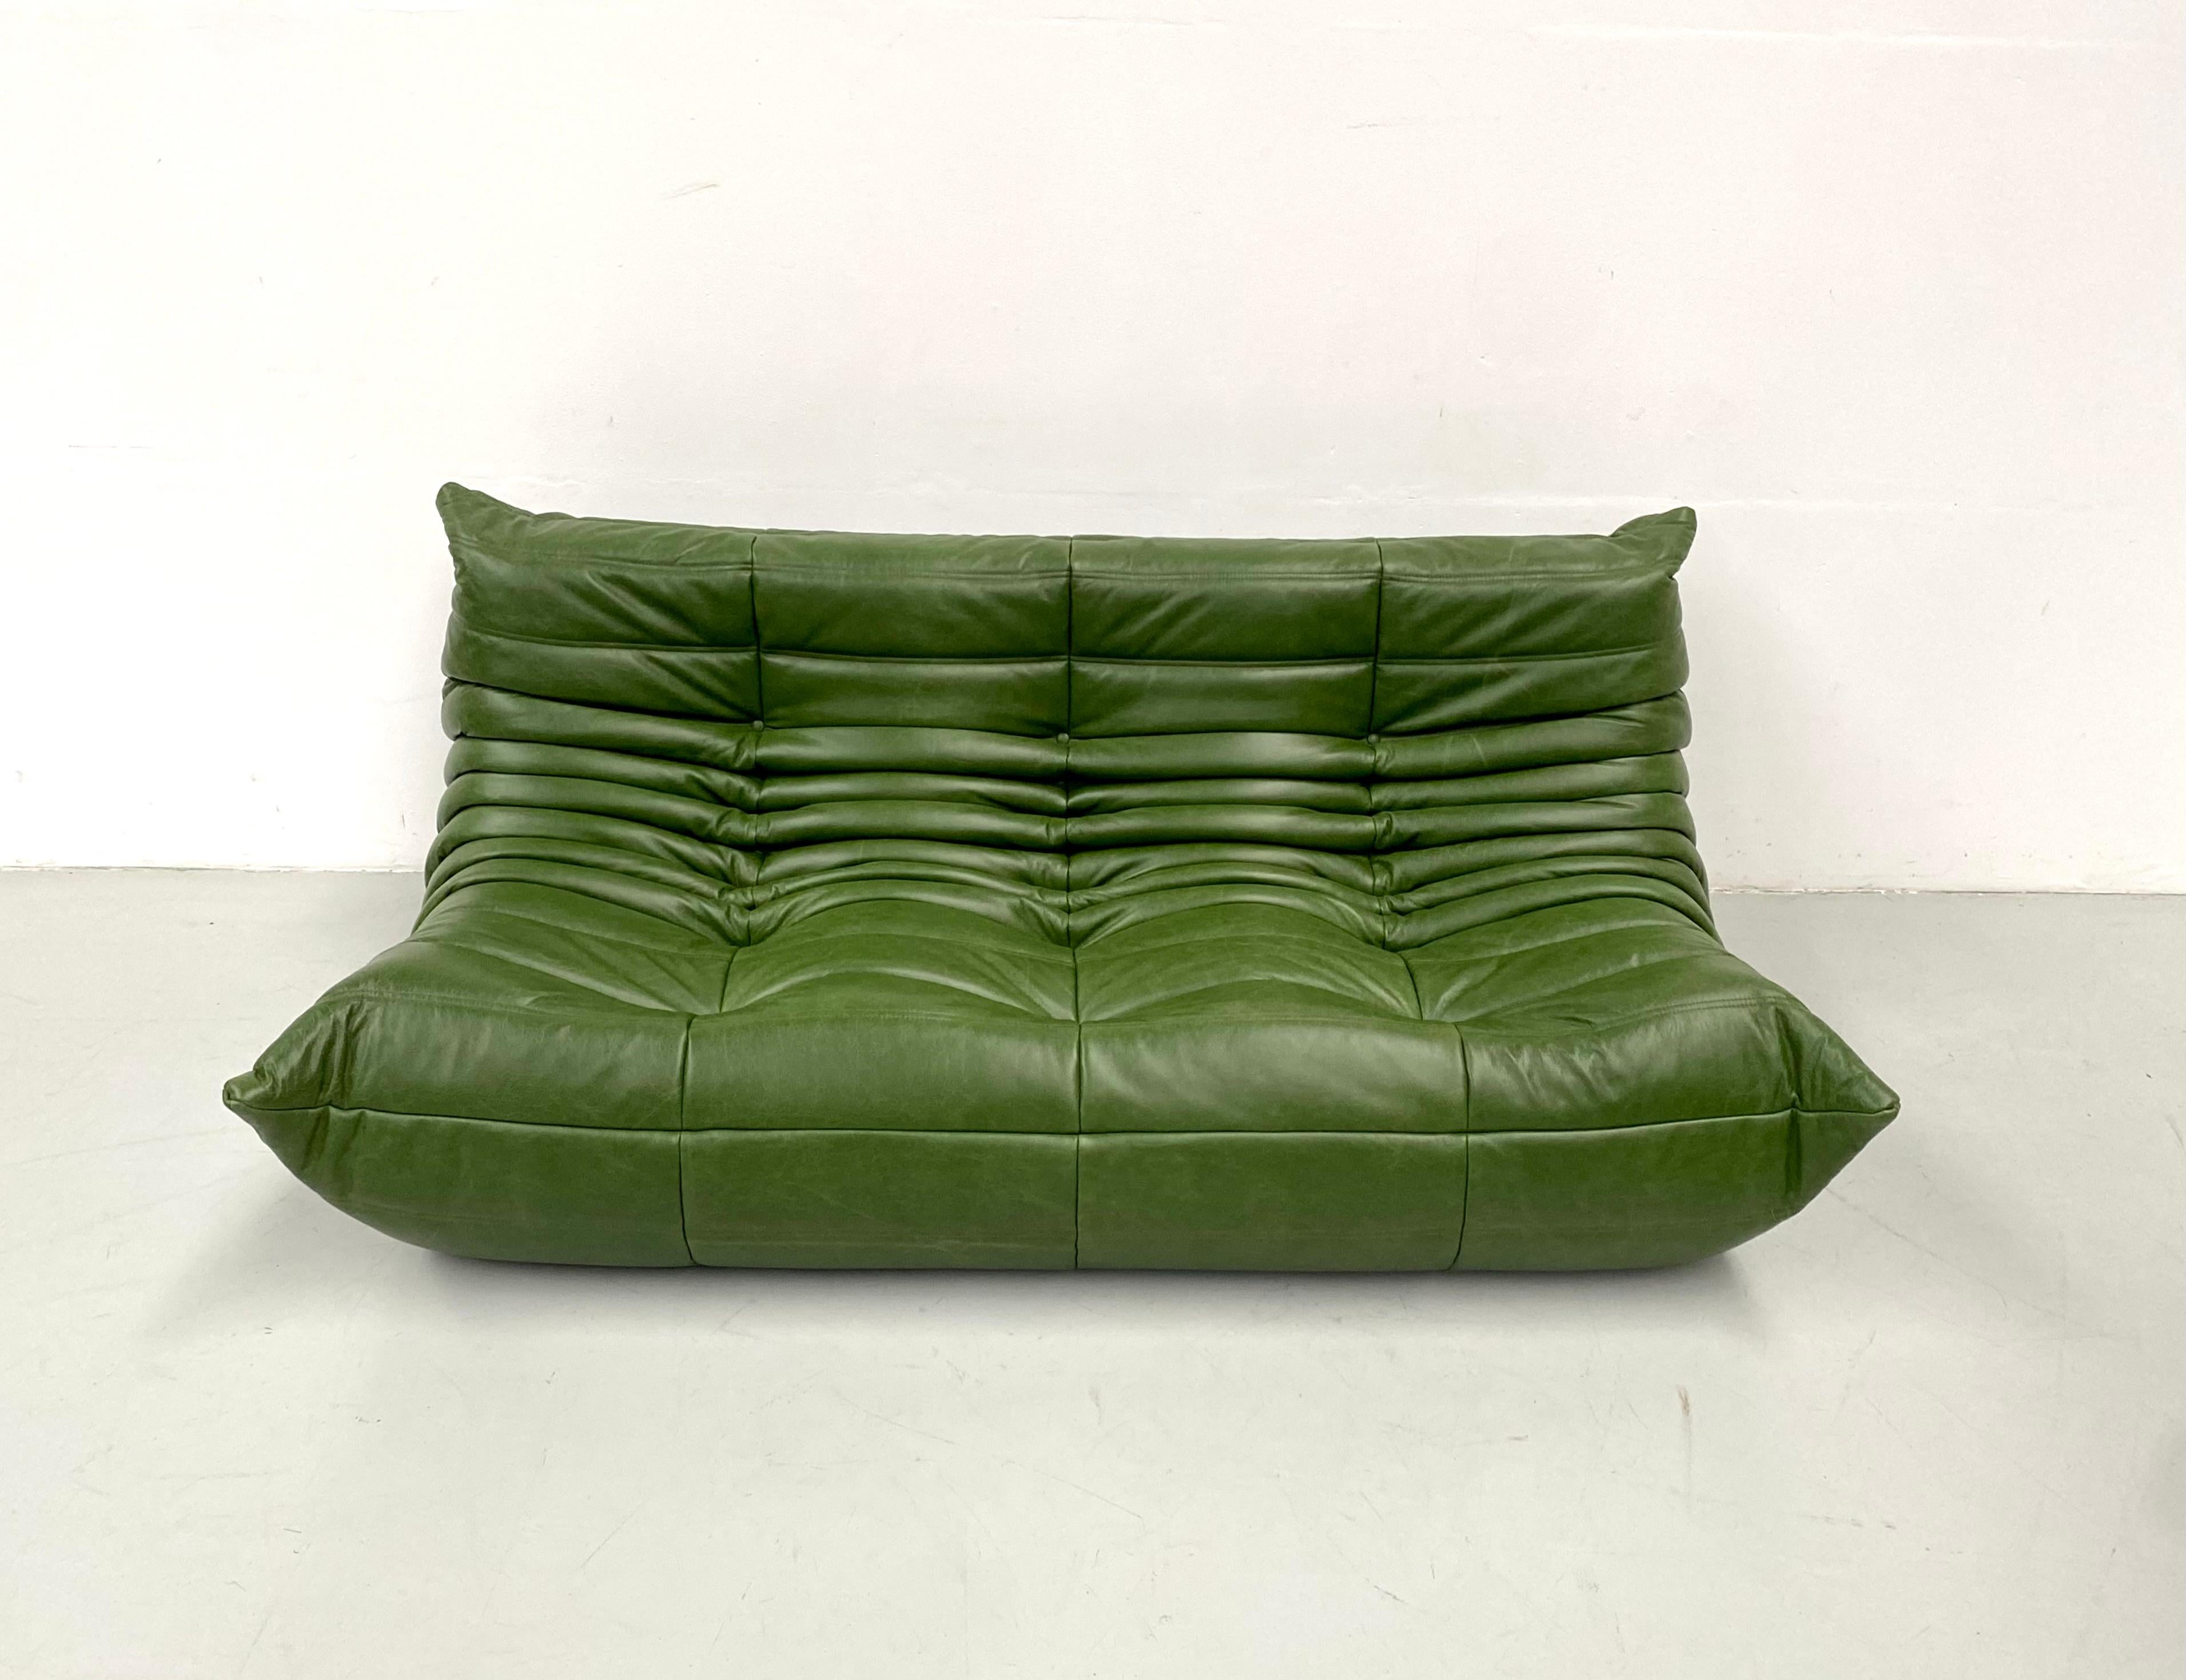 Vintage French Togo Sofa in Green Leather by Michel Ducaroy for Ligne Roset 1